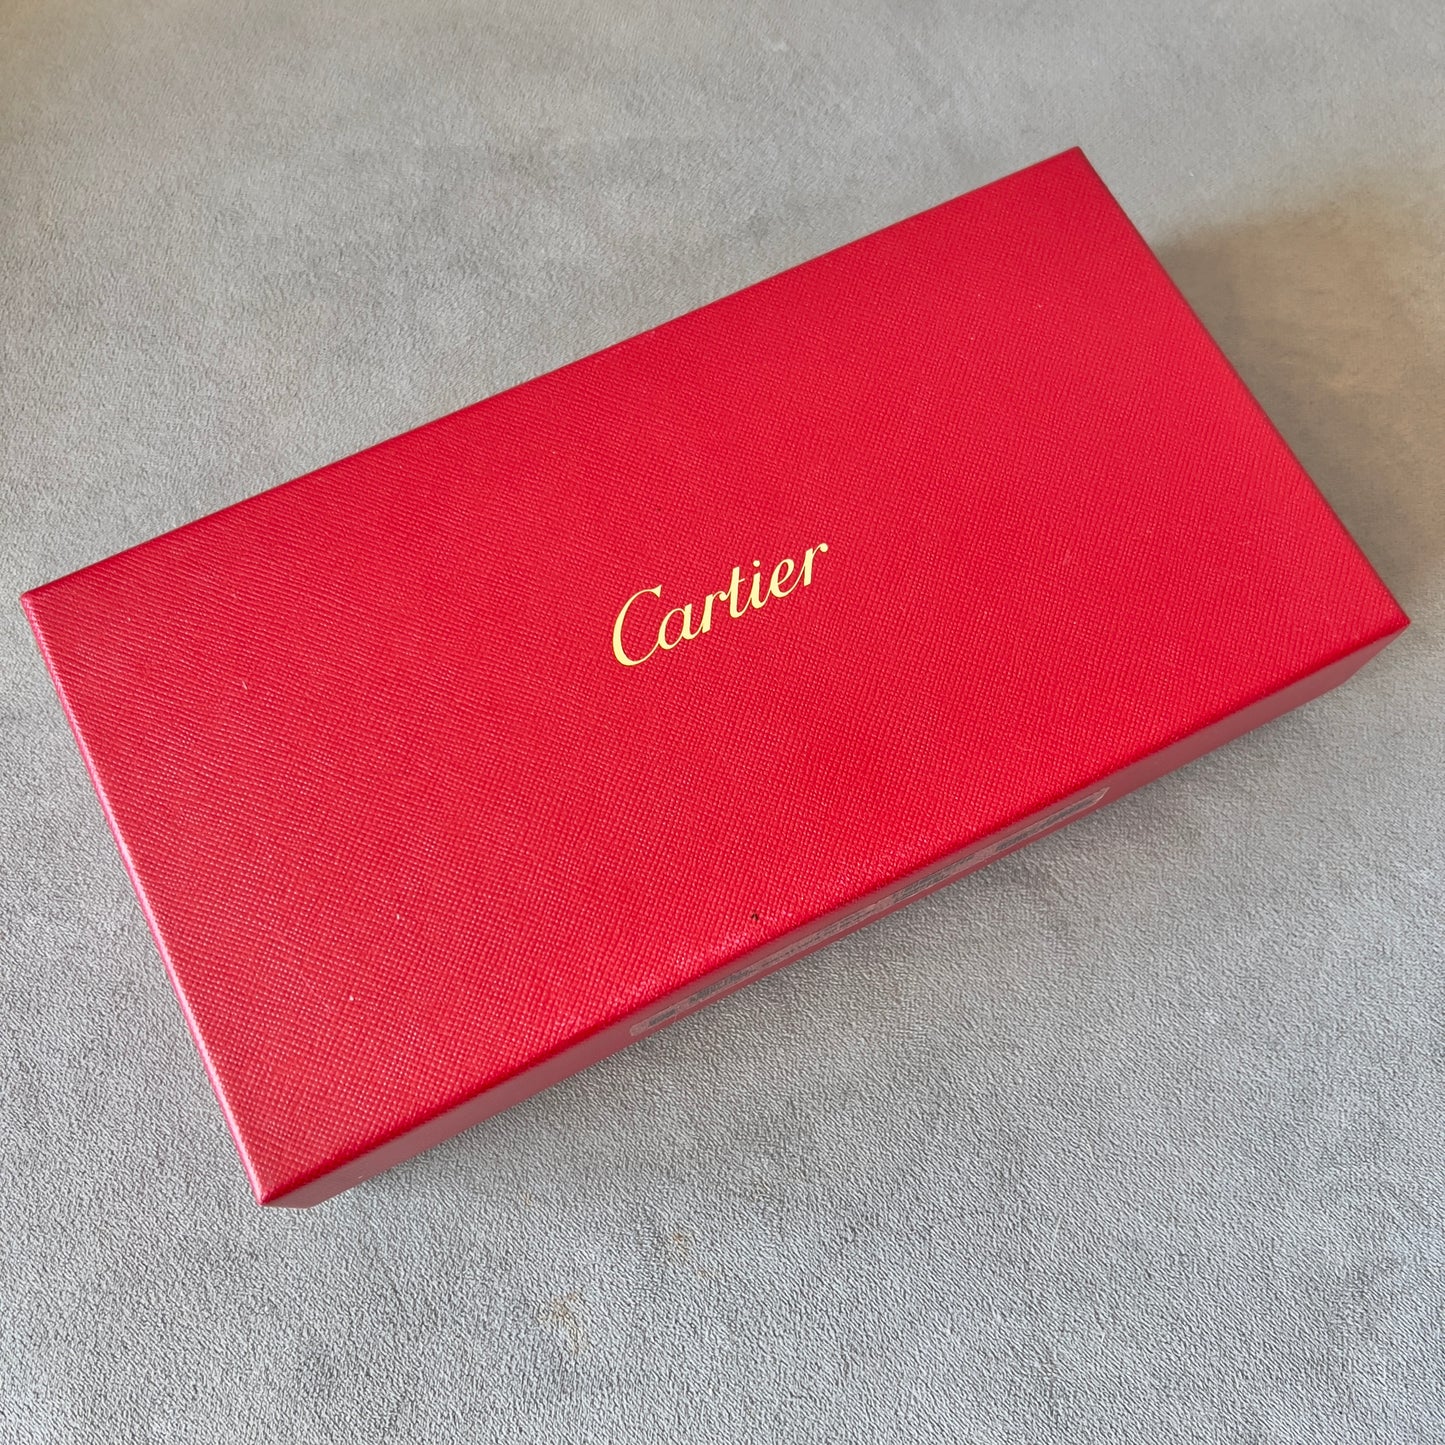 CARTIER Wallet Box 9.10x4.75x1.90 inches + Pouch + Certificate + Booklets